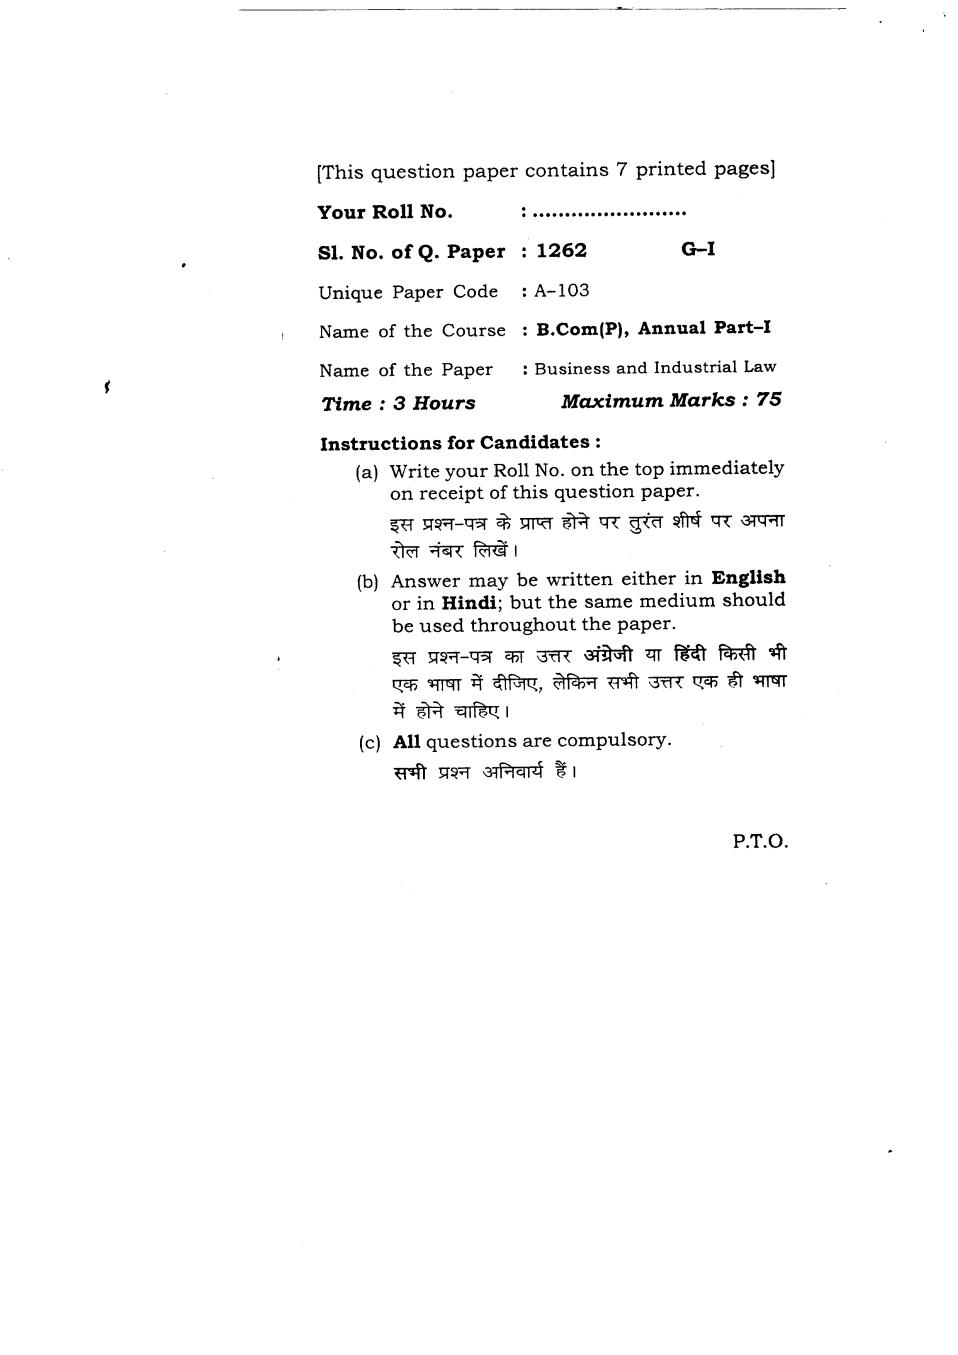 DU SOL B.Com Question Paper 1st Year 2018 Business and Industrial Law - Page 1